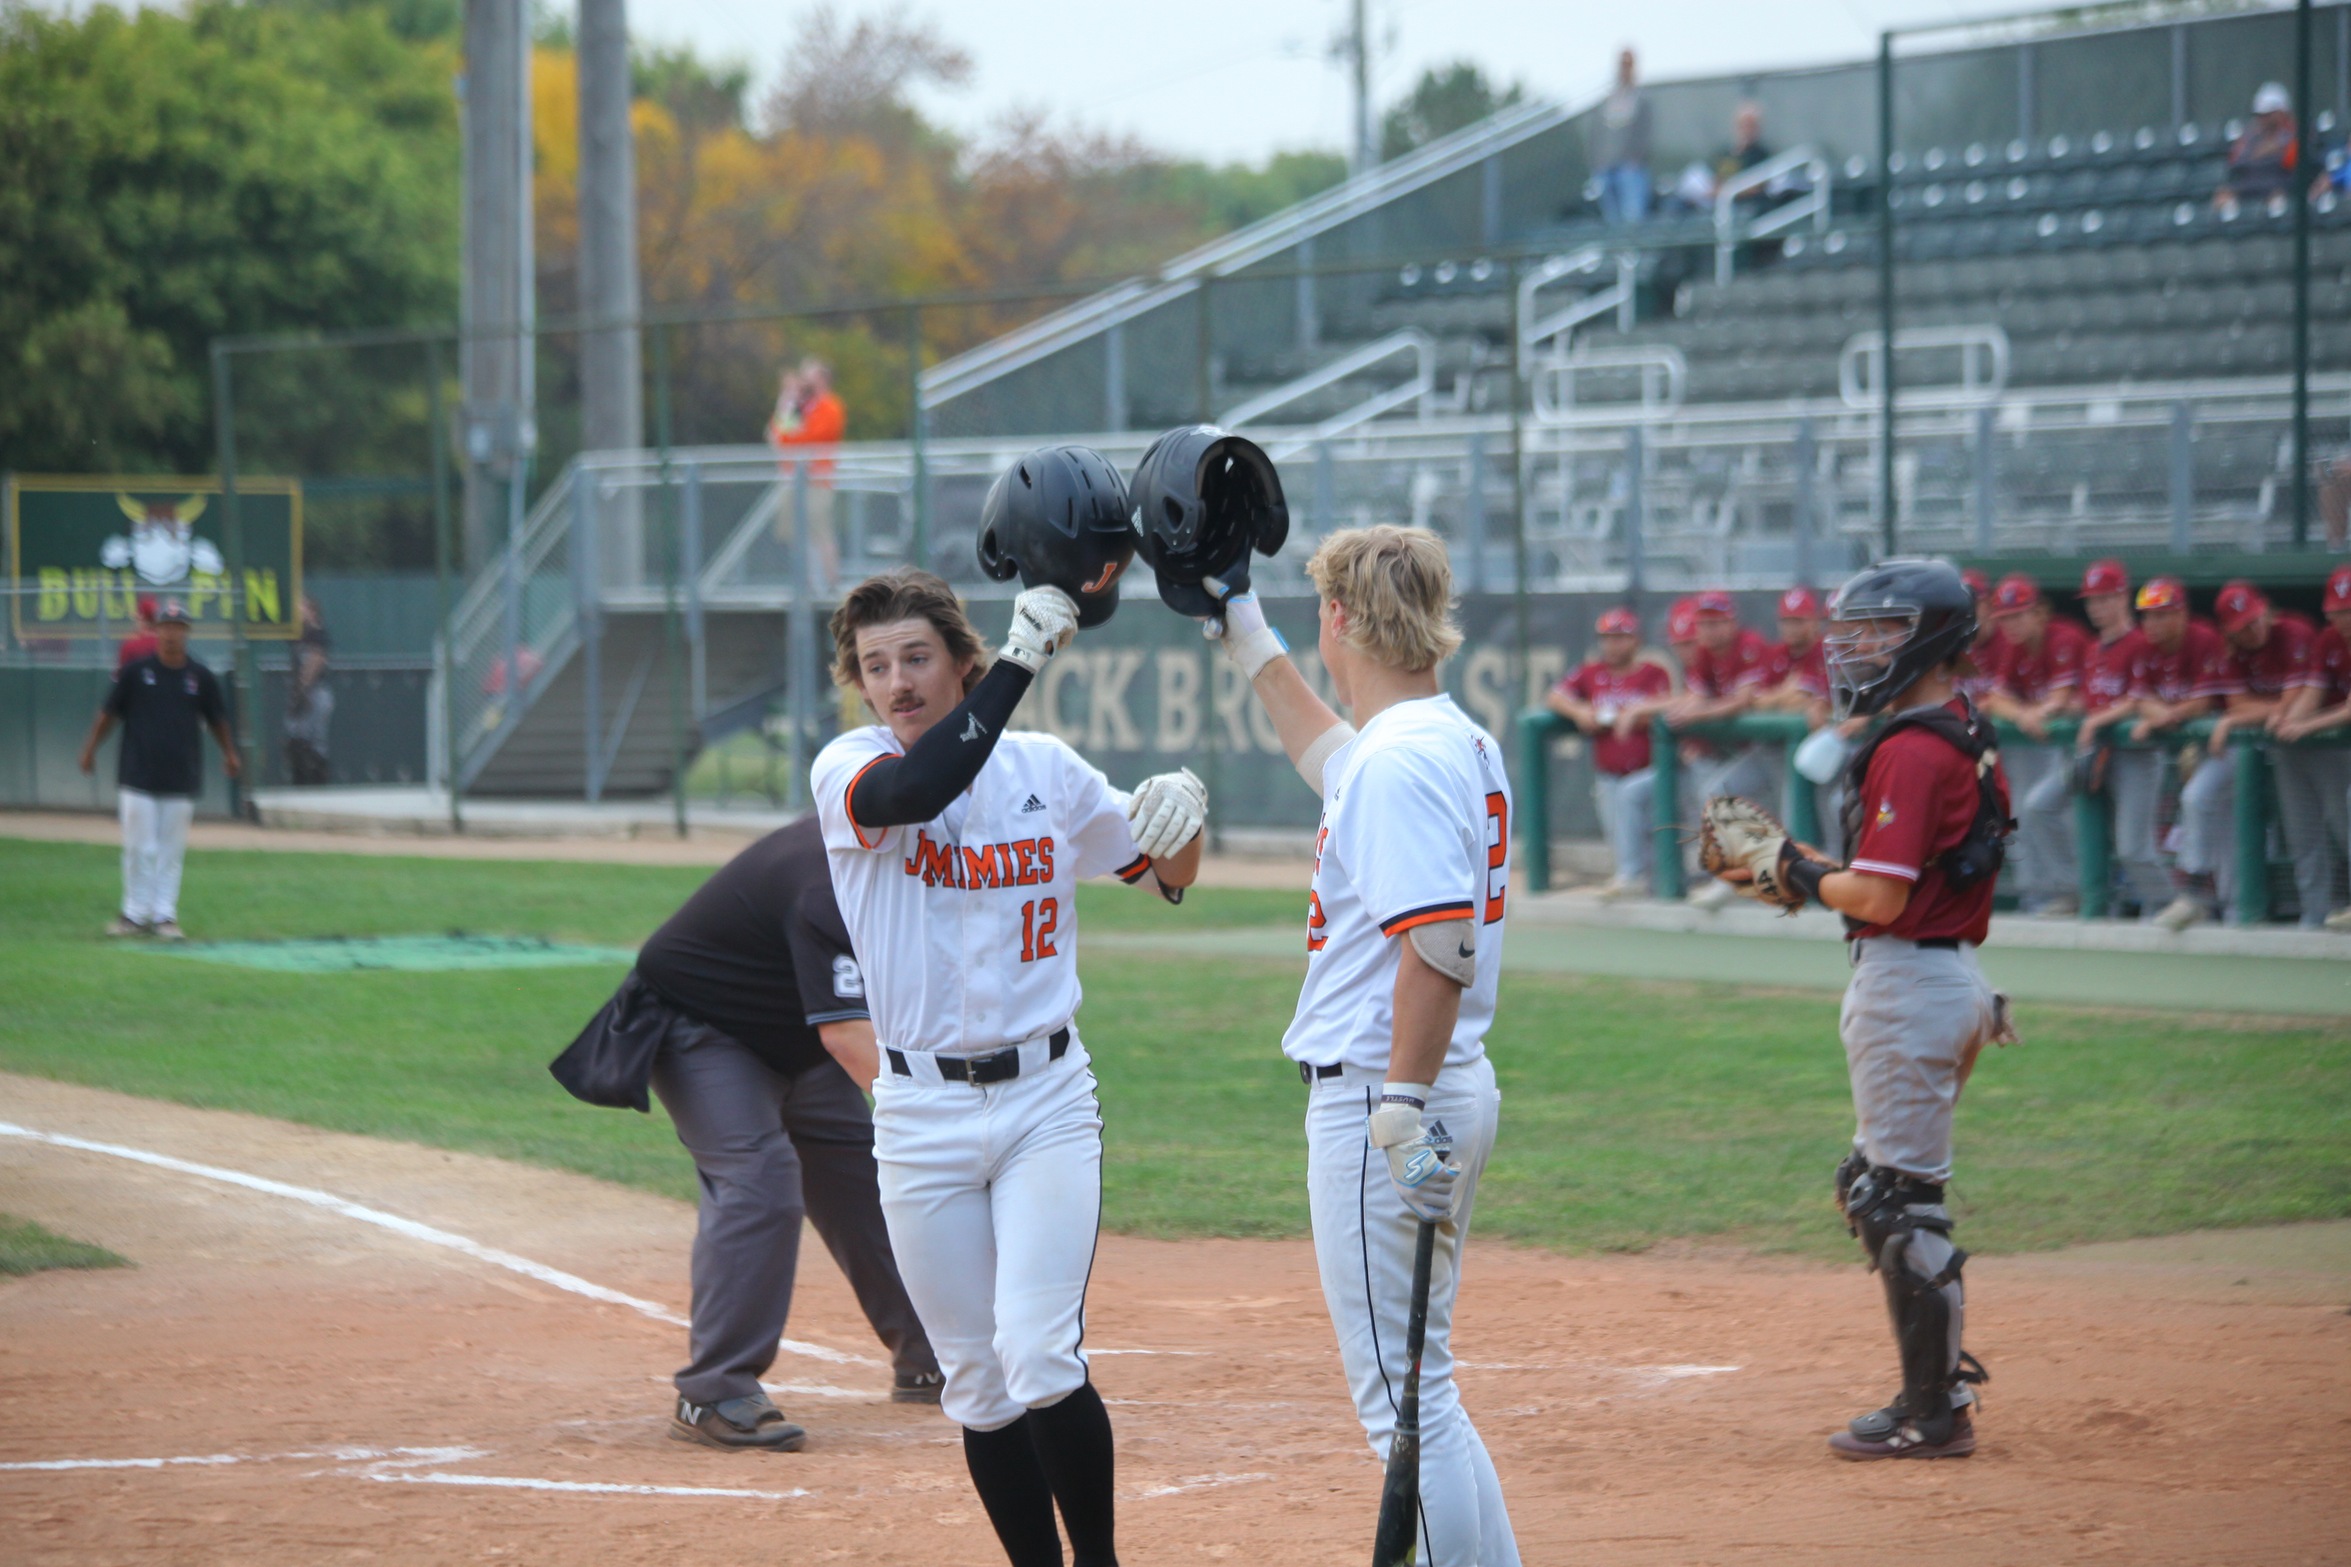 Jackson Bonneville (L) hit a pair of home runs in the Jimmies' 11-7 win over VCSU Wednesday / Photo by Molly Dockter, UJ Sports Information